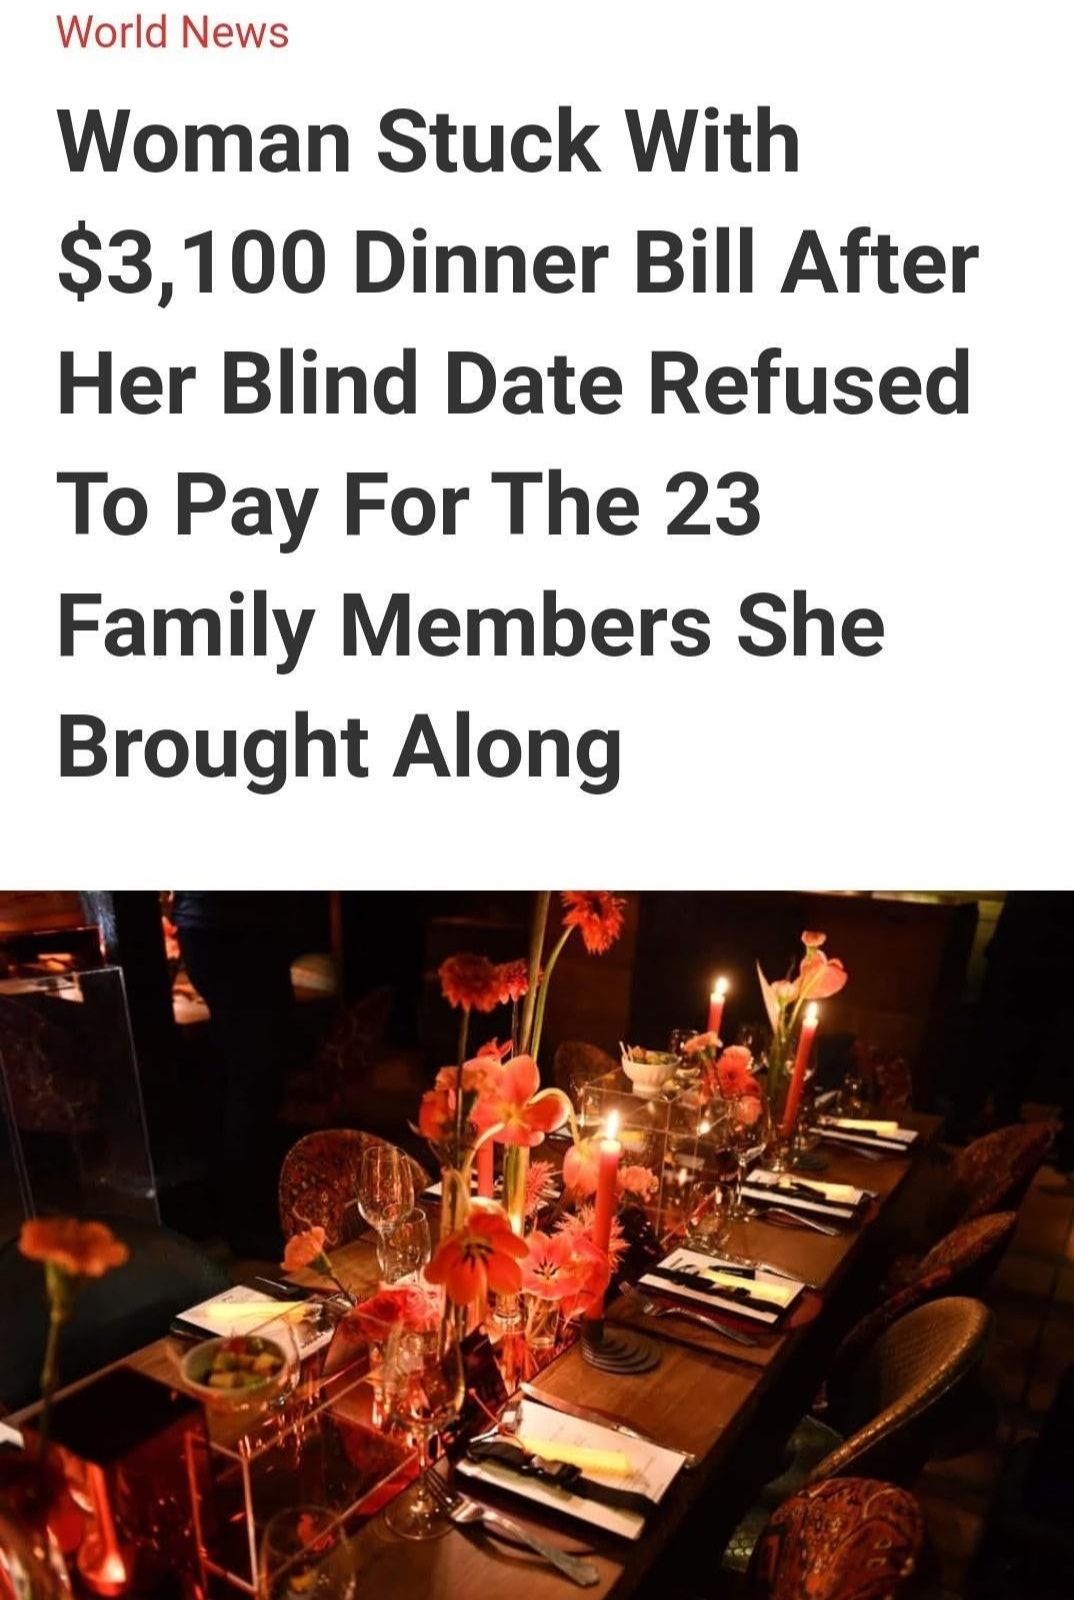 cringeworthy pics - woman stuck with 3100 bill - World News Woman Stuck With $3,100 Dinner Bill After Her Blind Date Refused To Pay For The 23 Family Members She Brought Along